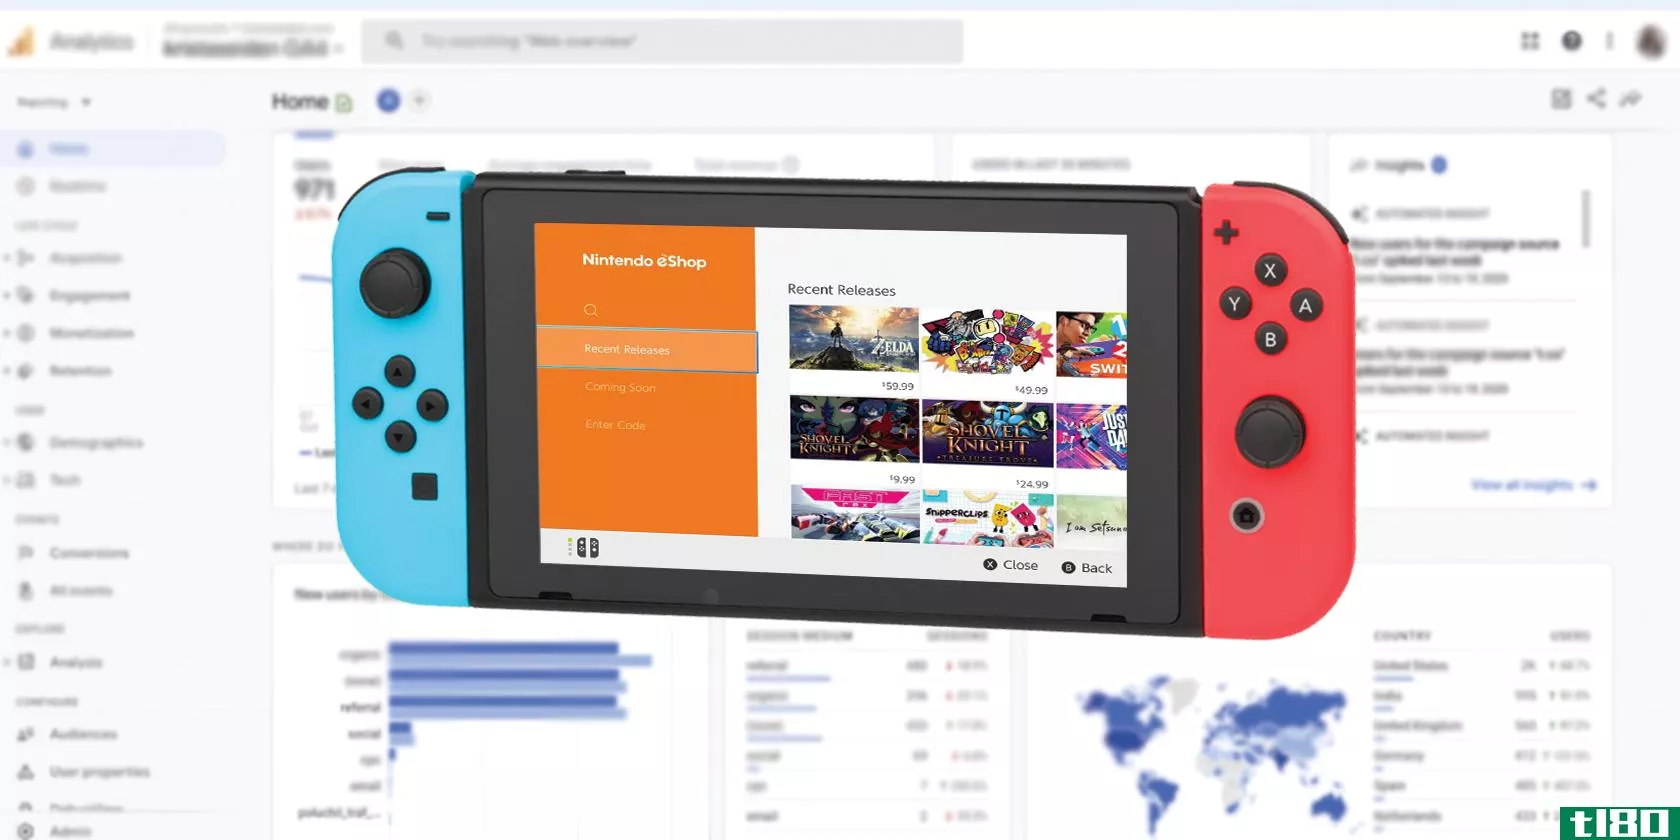 nintendo switch with eshop on screen and google ****ytics in background